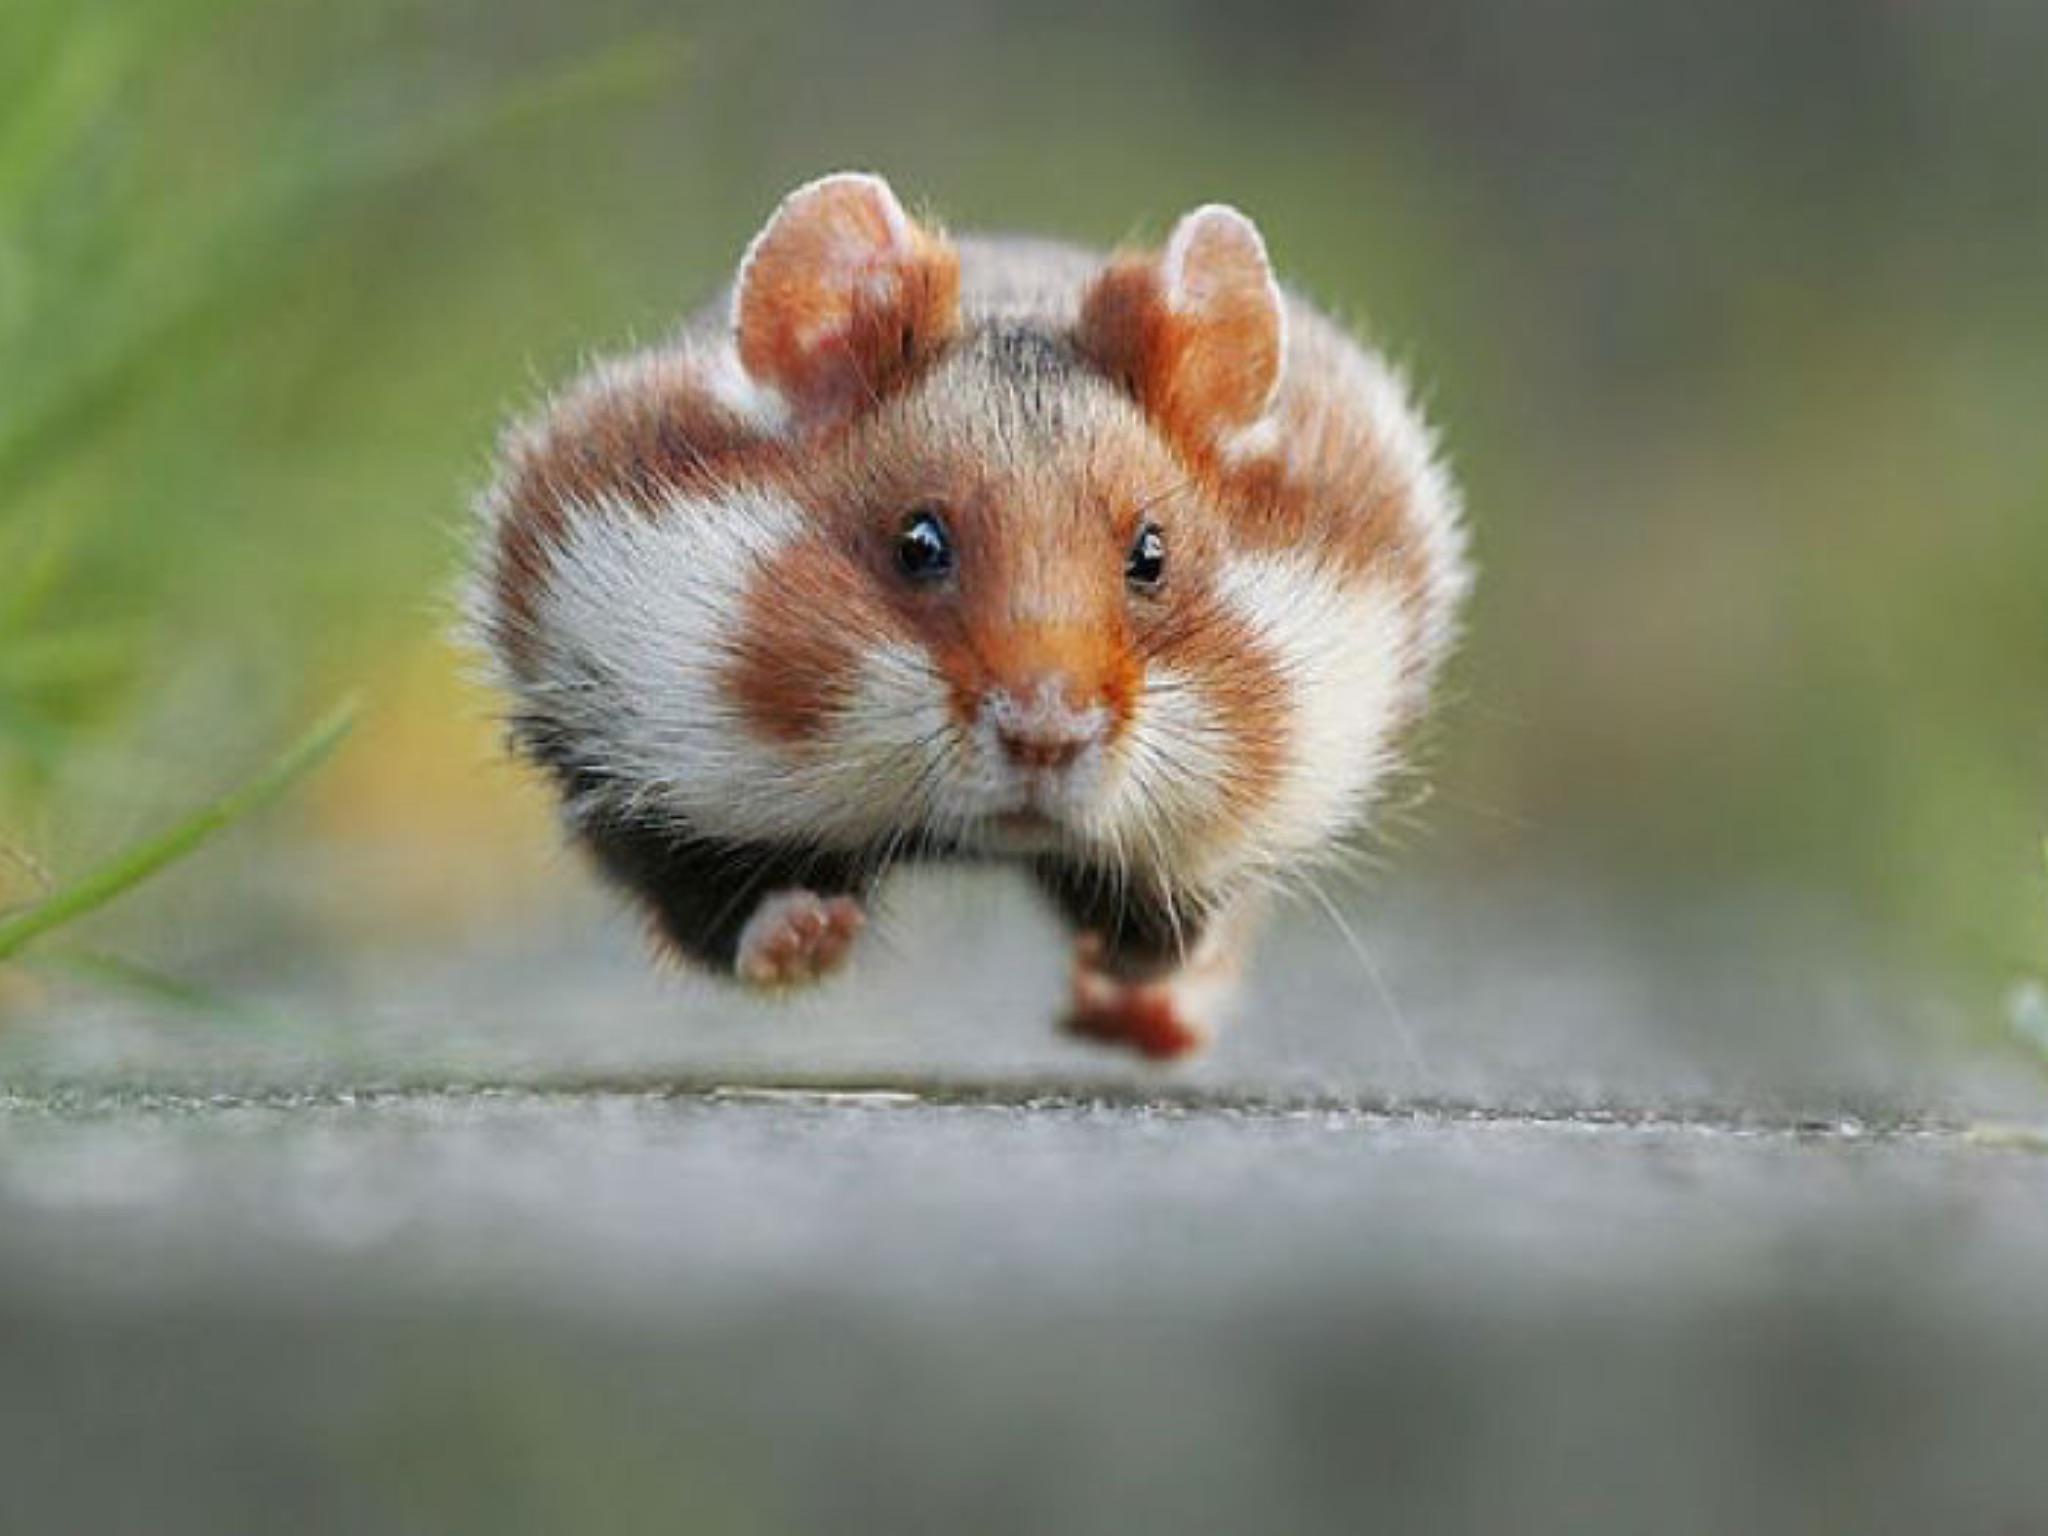 life lessons learned late  - “My childhood hamster did not, in fact, run away.” - u/kifflington